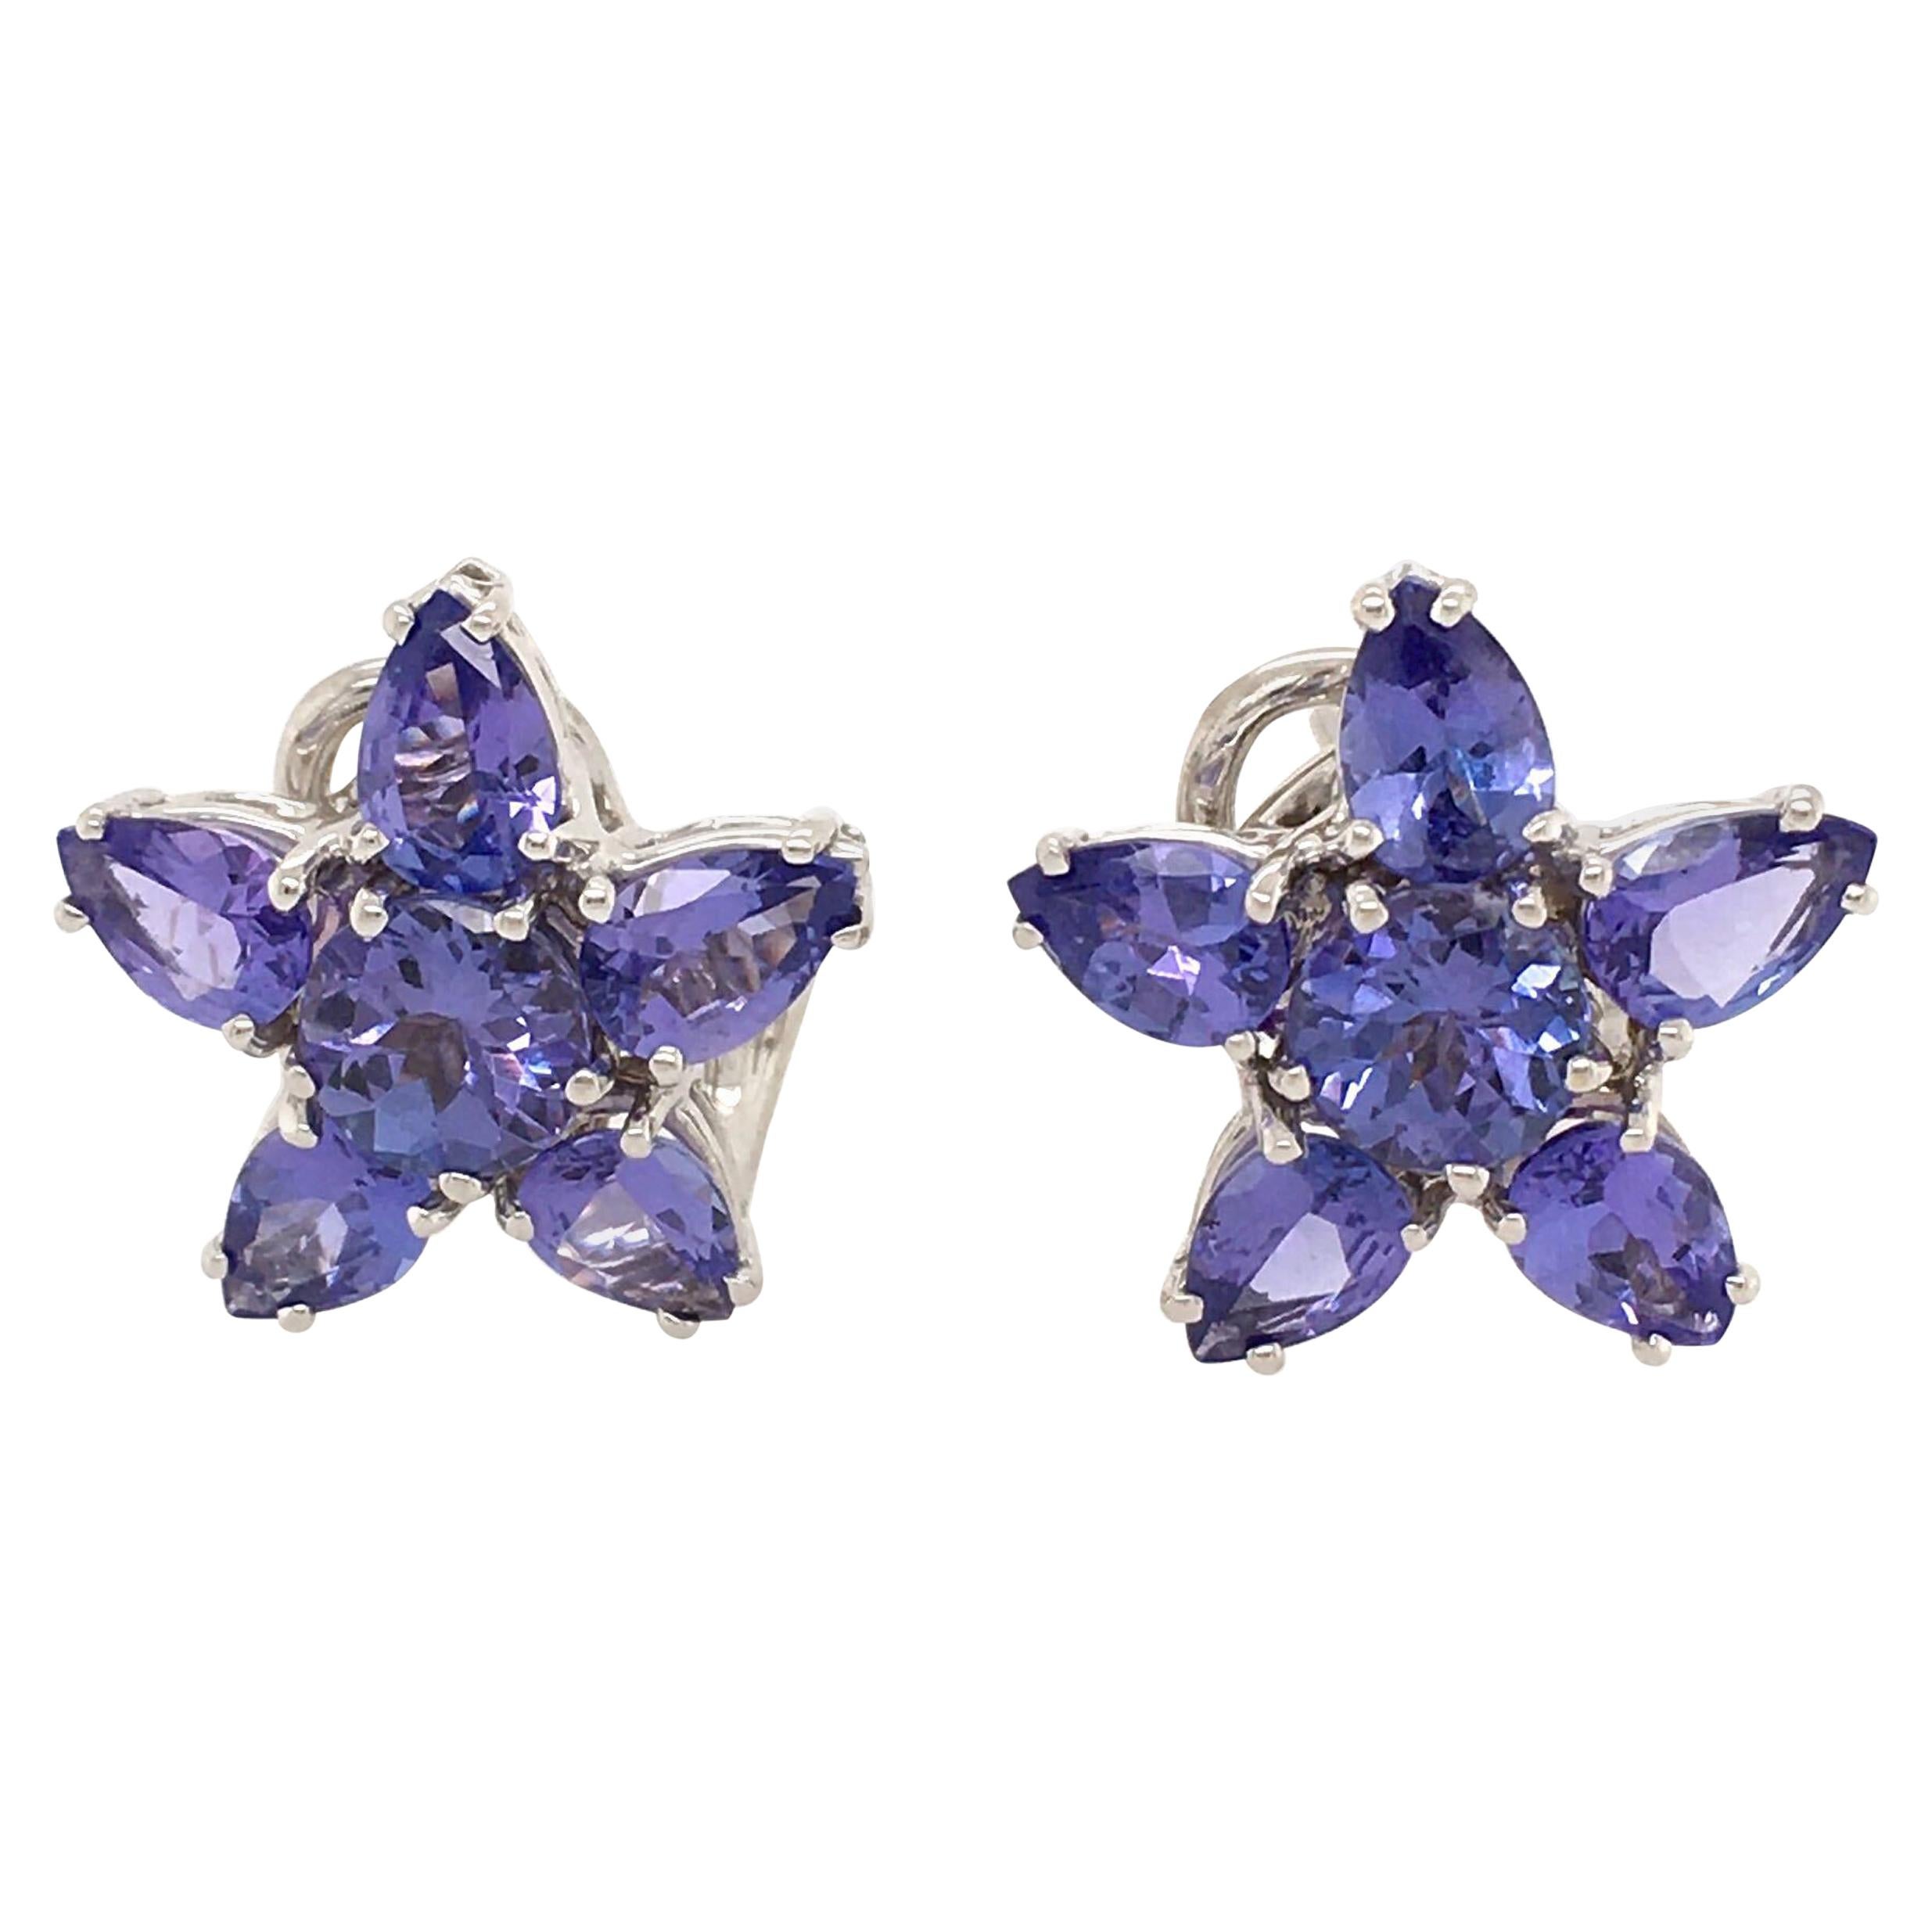 Mish Tanzanite and Gold Flower Earrings